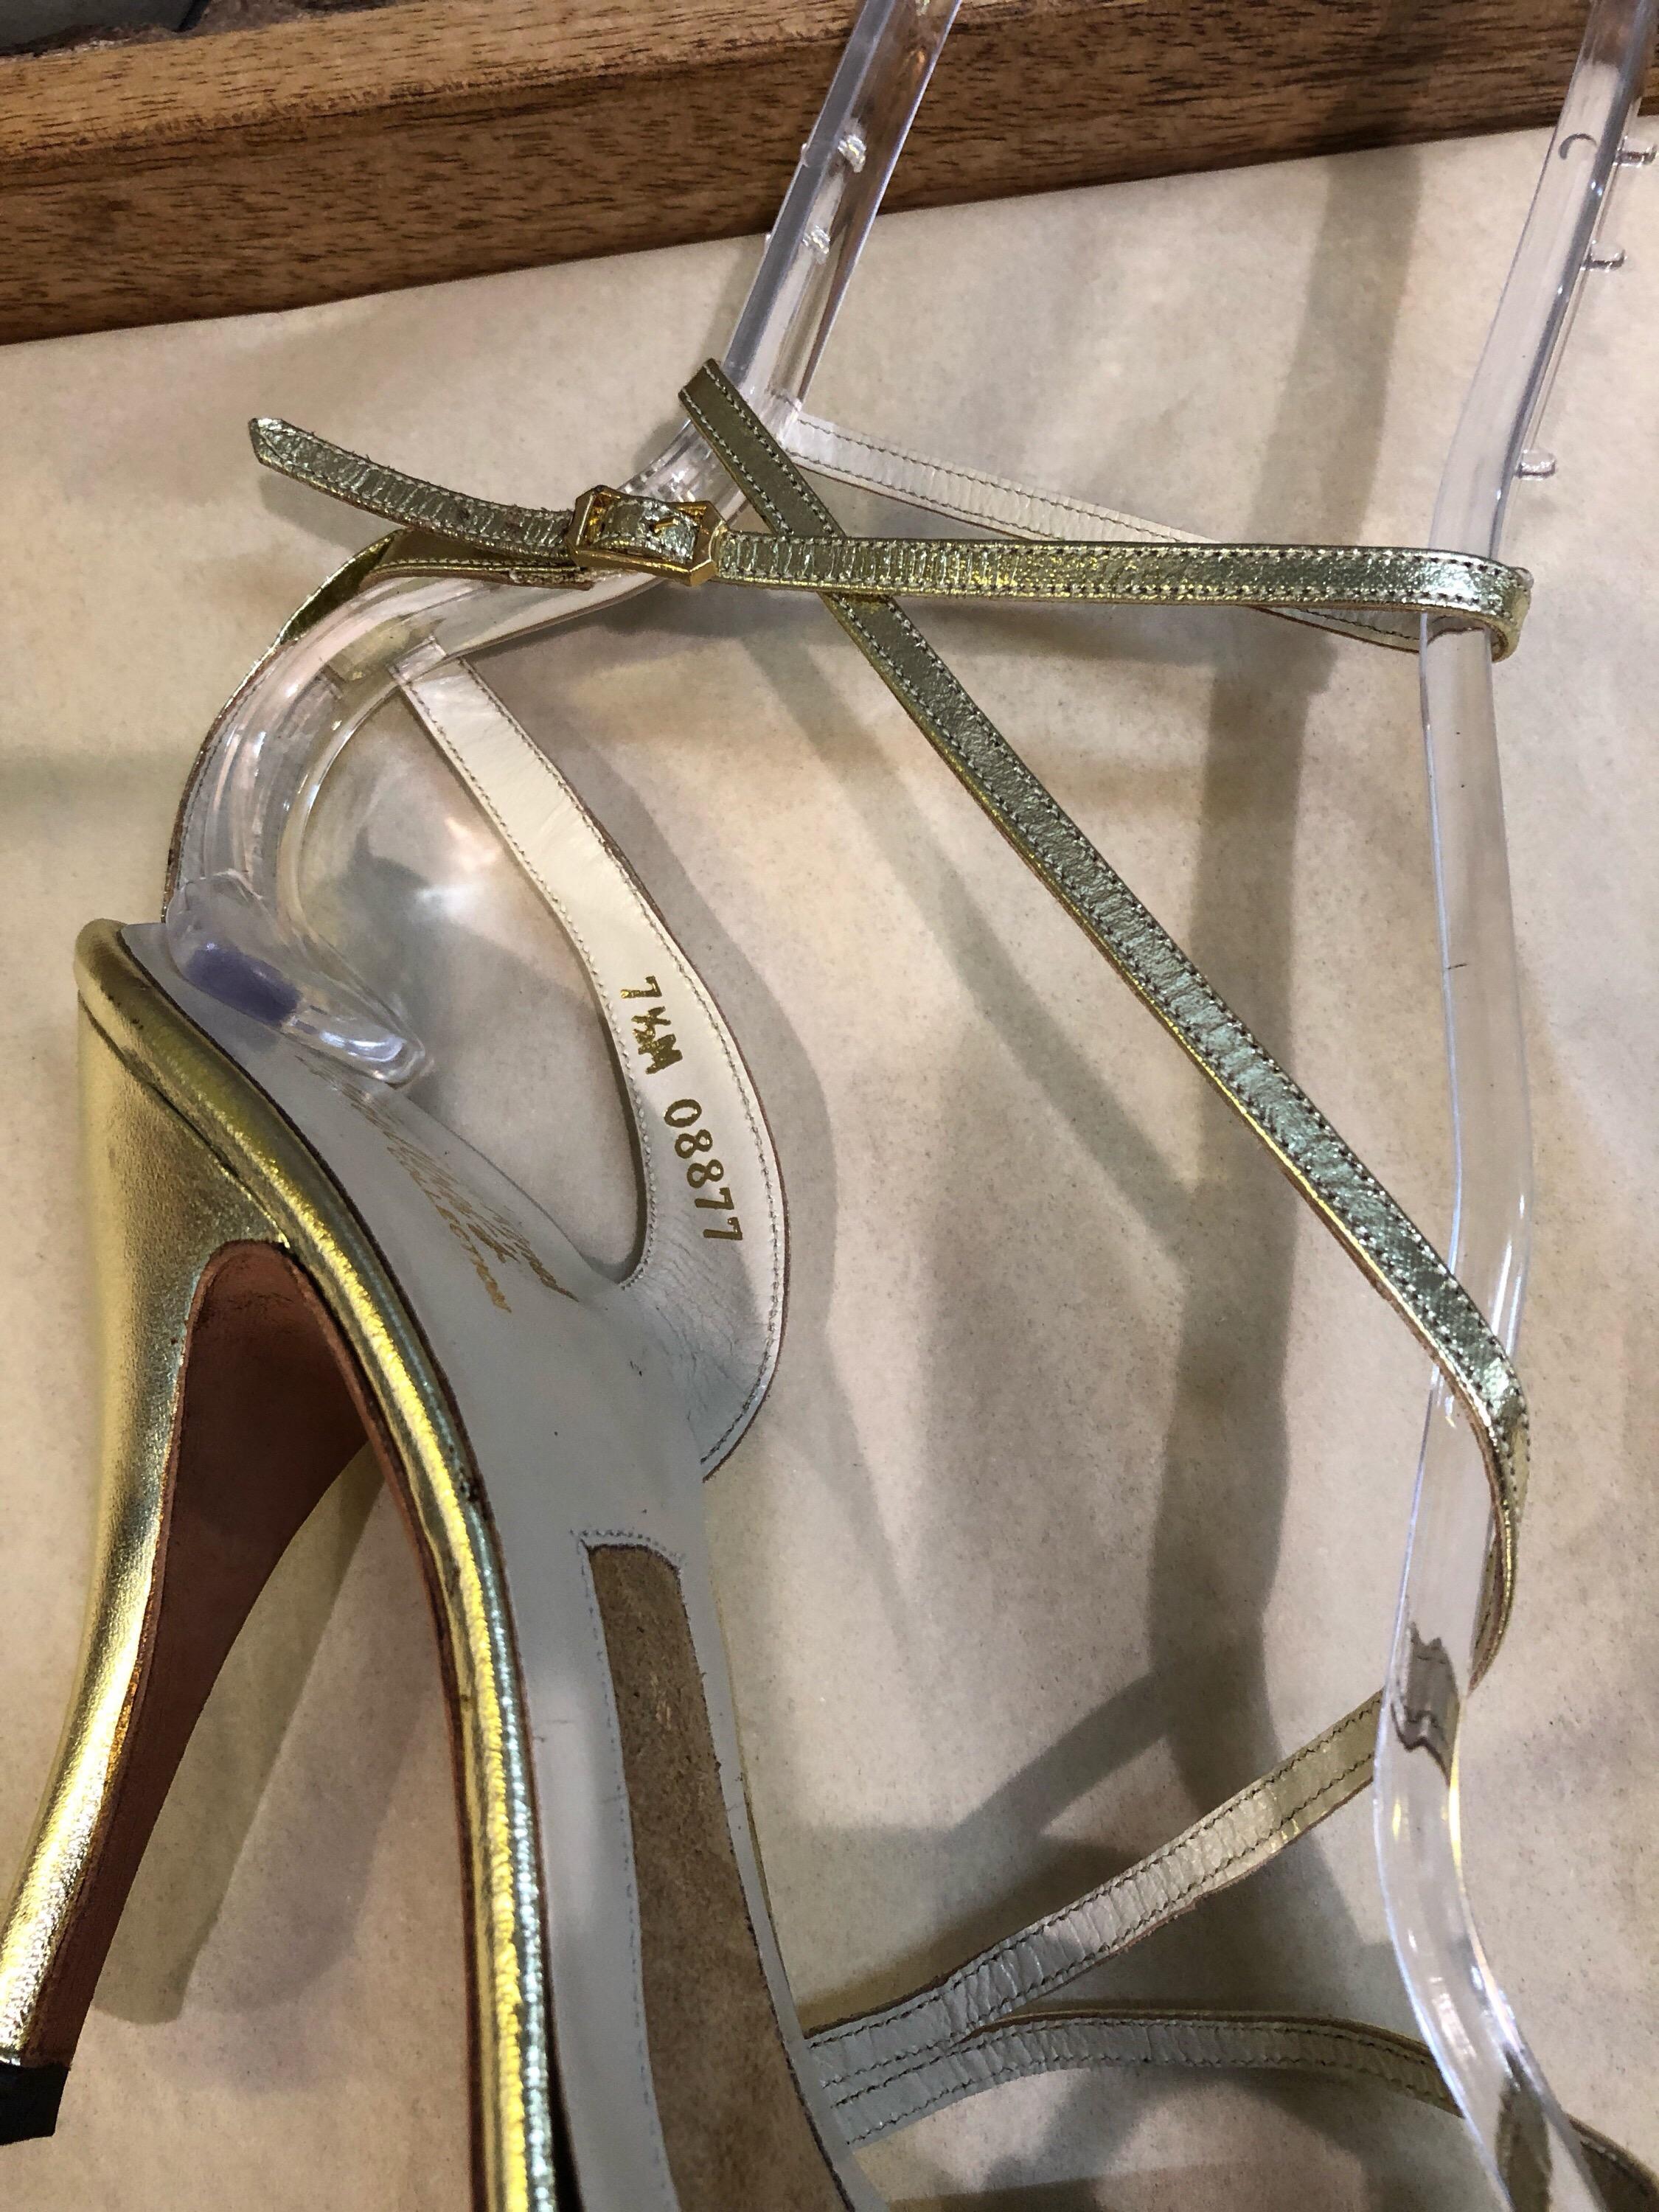 New 1970s Connie Smith Bullocks Wilshire Size 7.5 Gold Metallic Strappy Heels For Sale 2